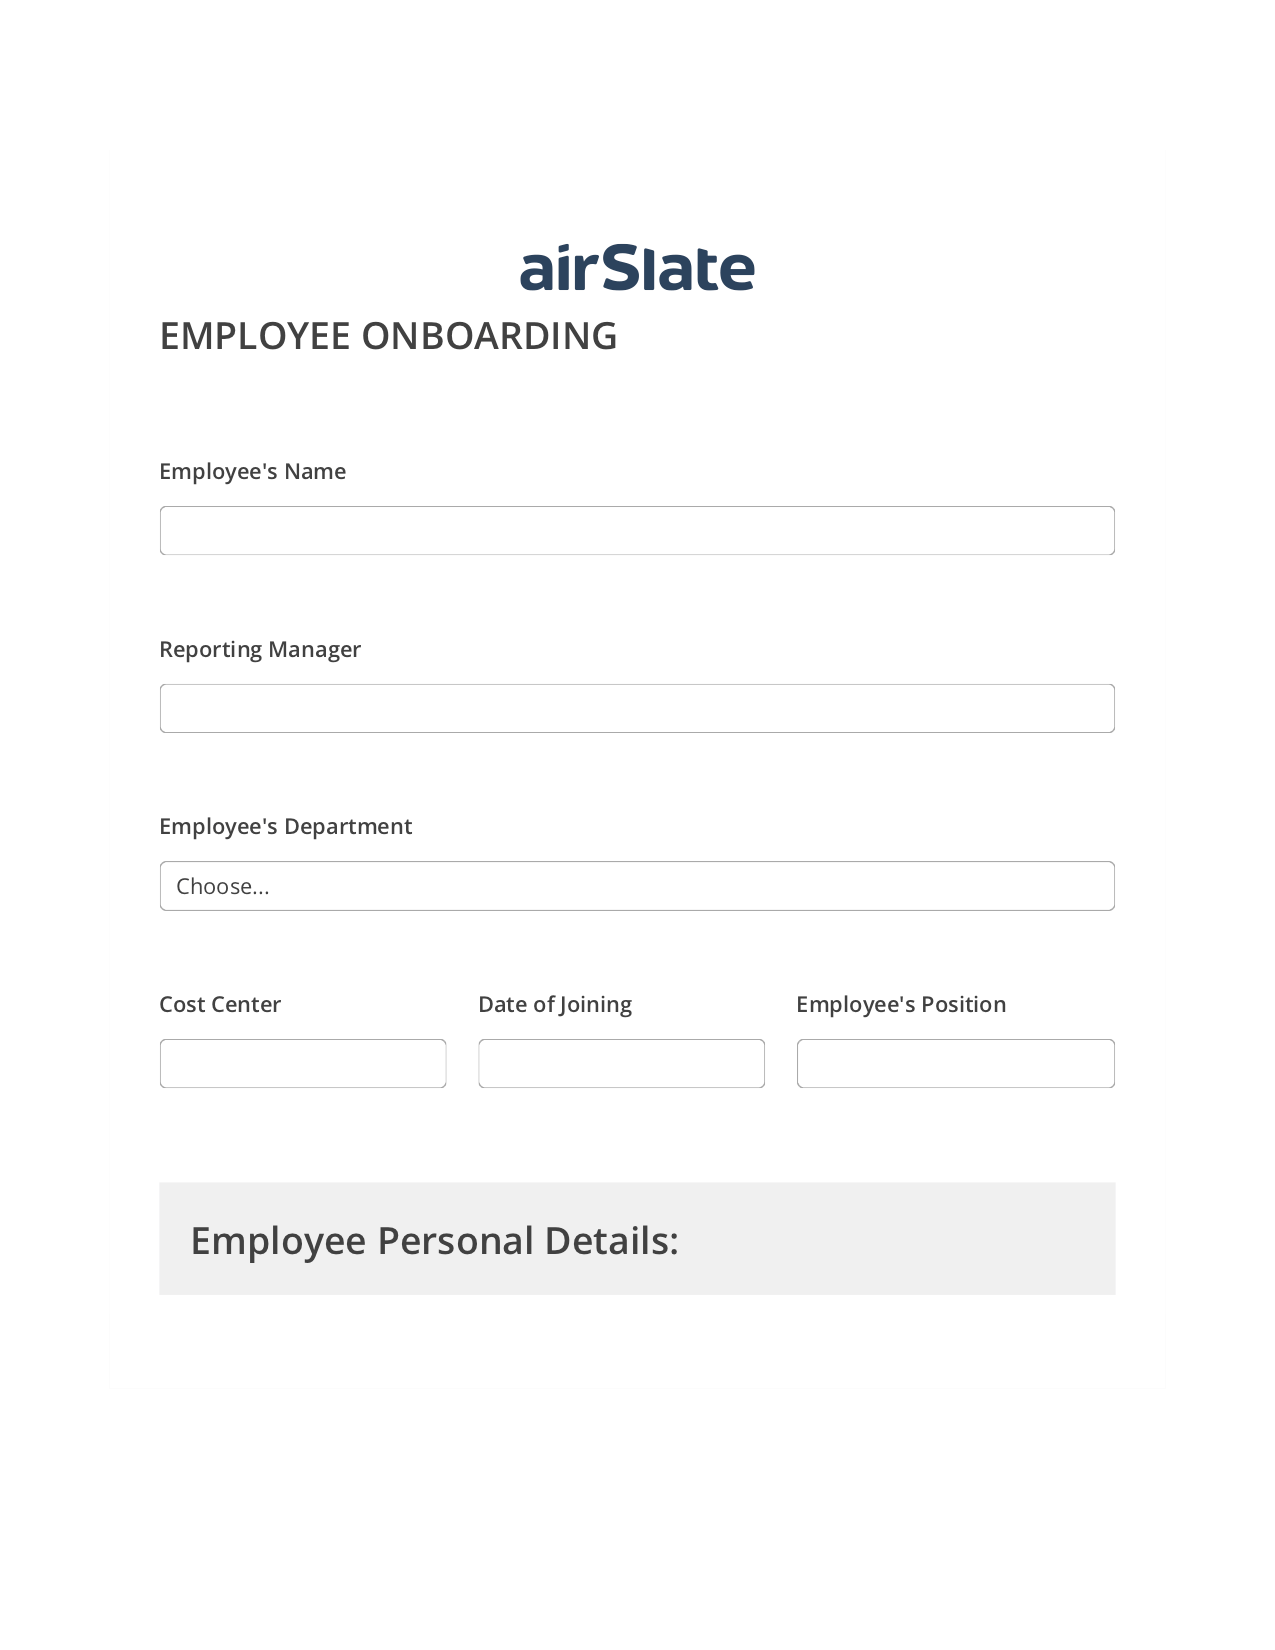 Employee Onboarding Workflow Pre-fill Slate from MS Dynamics 365 record, Update Salesforce Record Bot, Export to Smartsheet